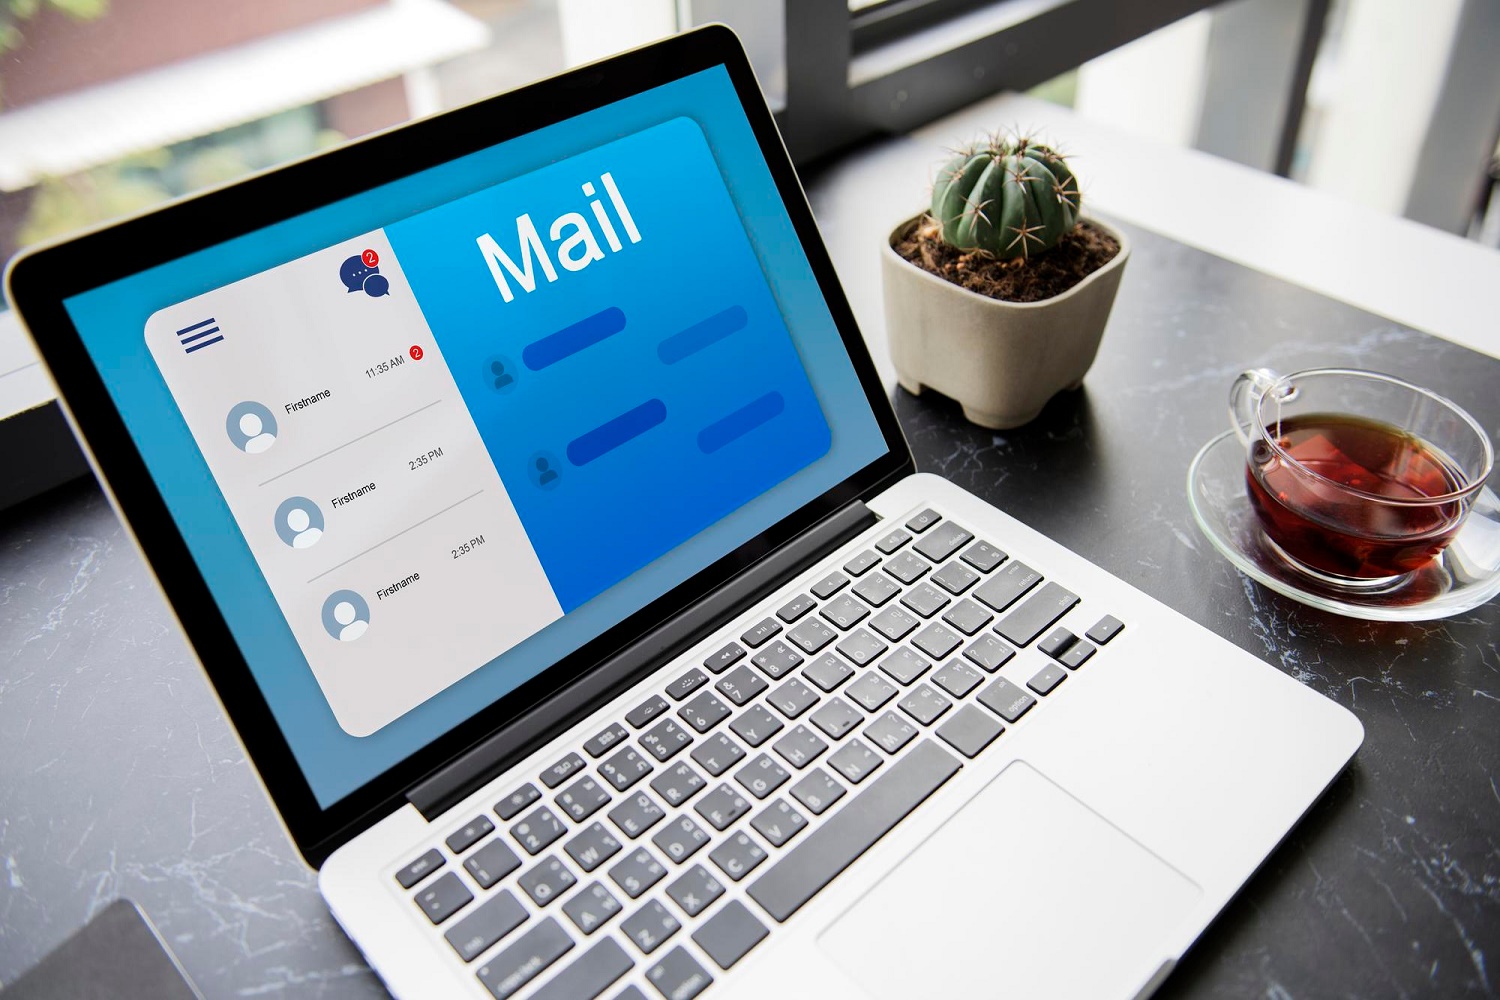 How to write or create emails effectively as a marketing strategy to boost business.